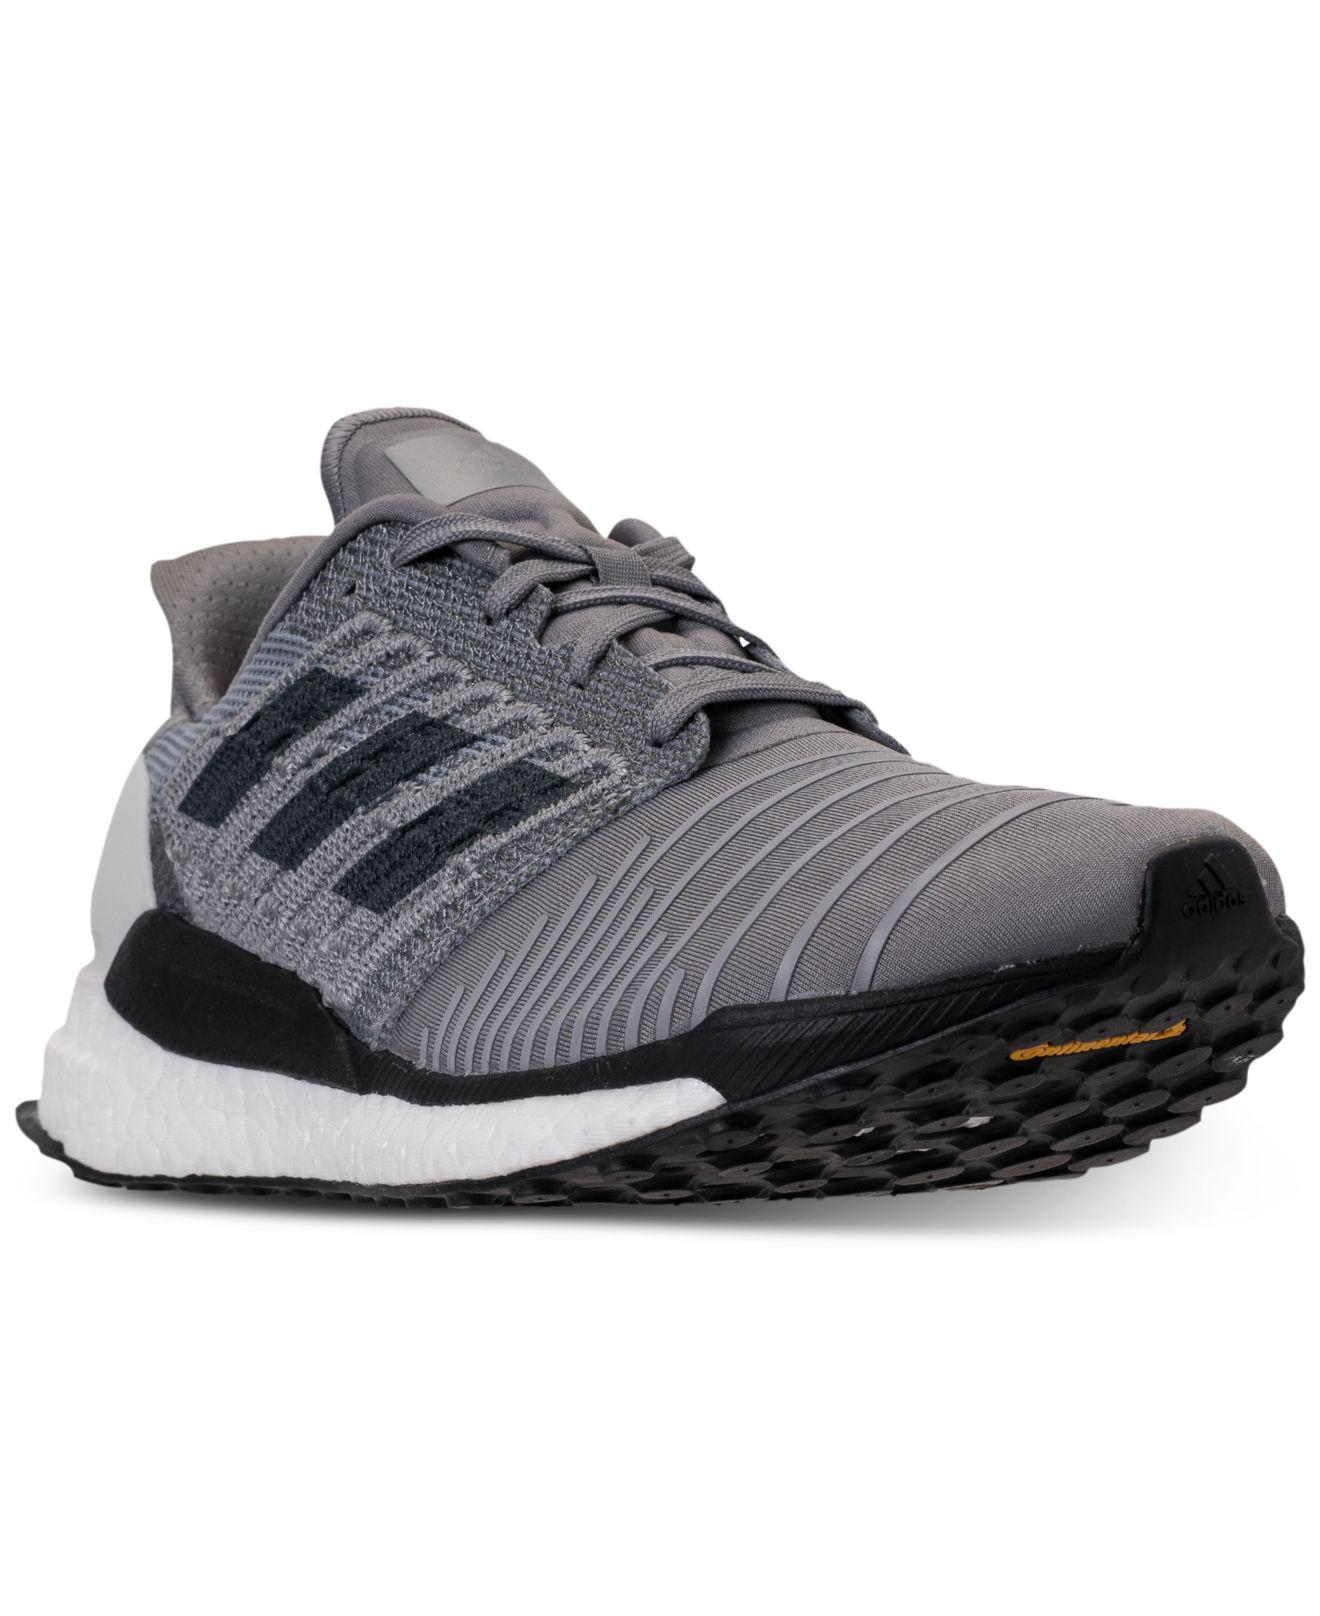 adidas Rubber Solarboost Running Shoes 